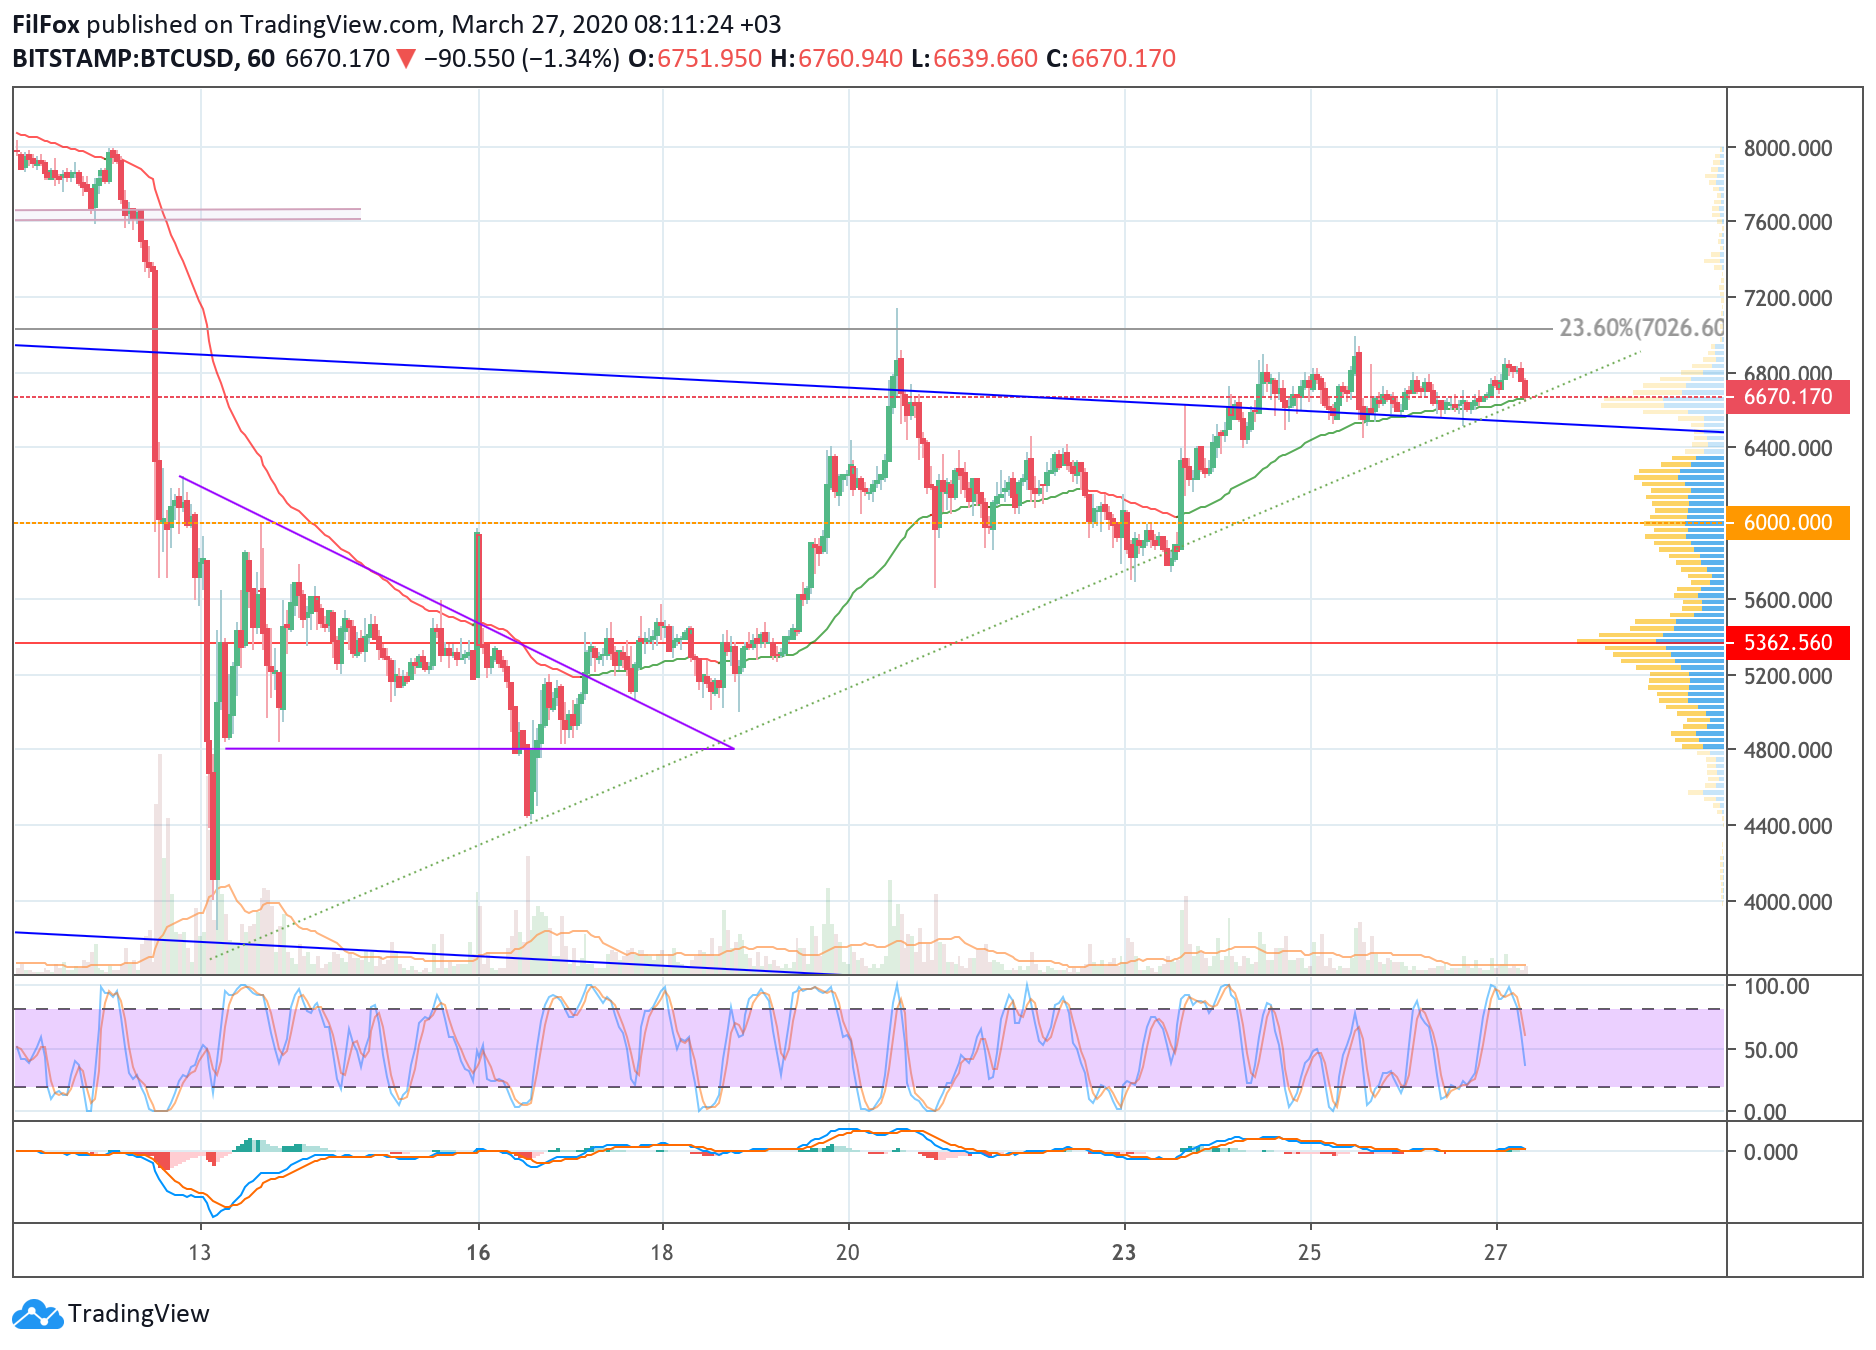 Analysis of cryptocurrency pairs BTC / USD, ETH / USD and XRP / USD on 03/27/2020